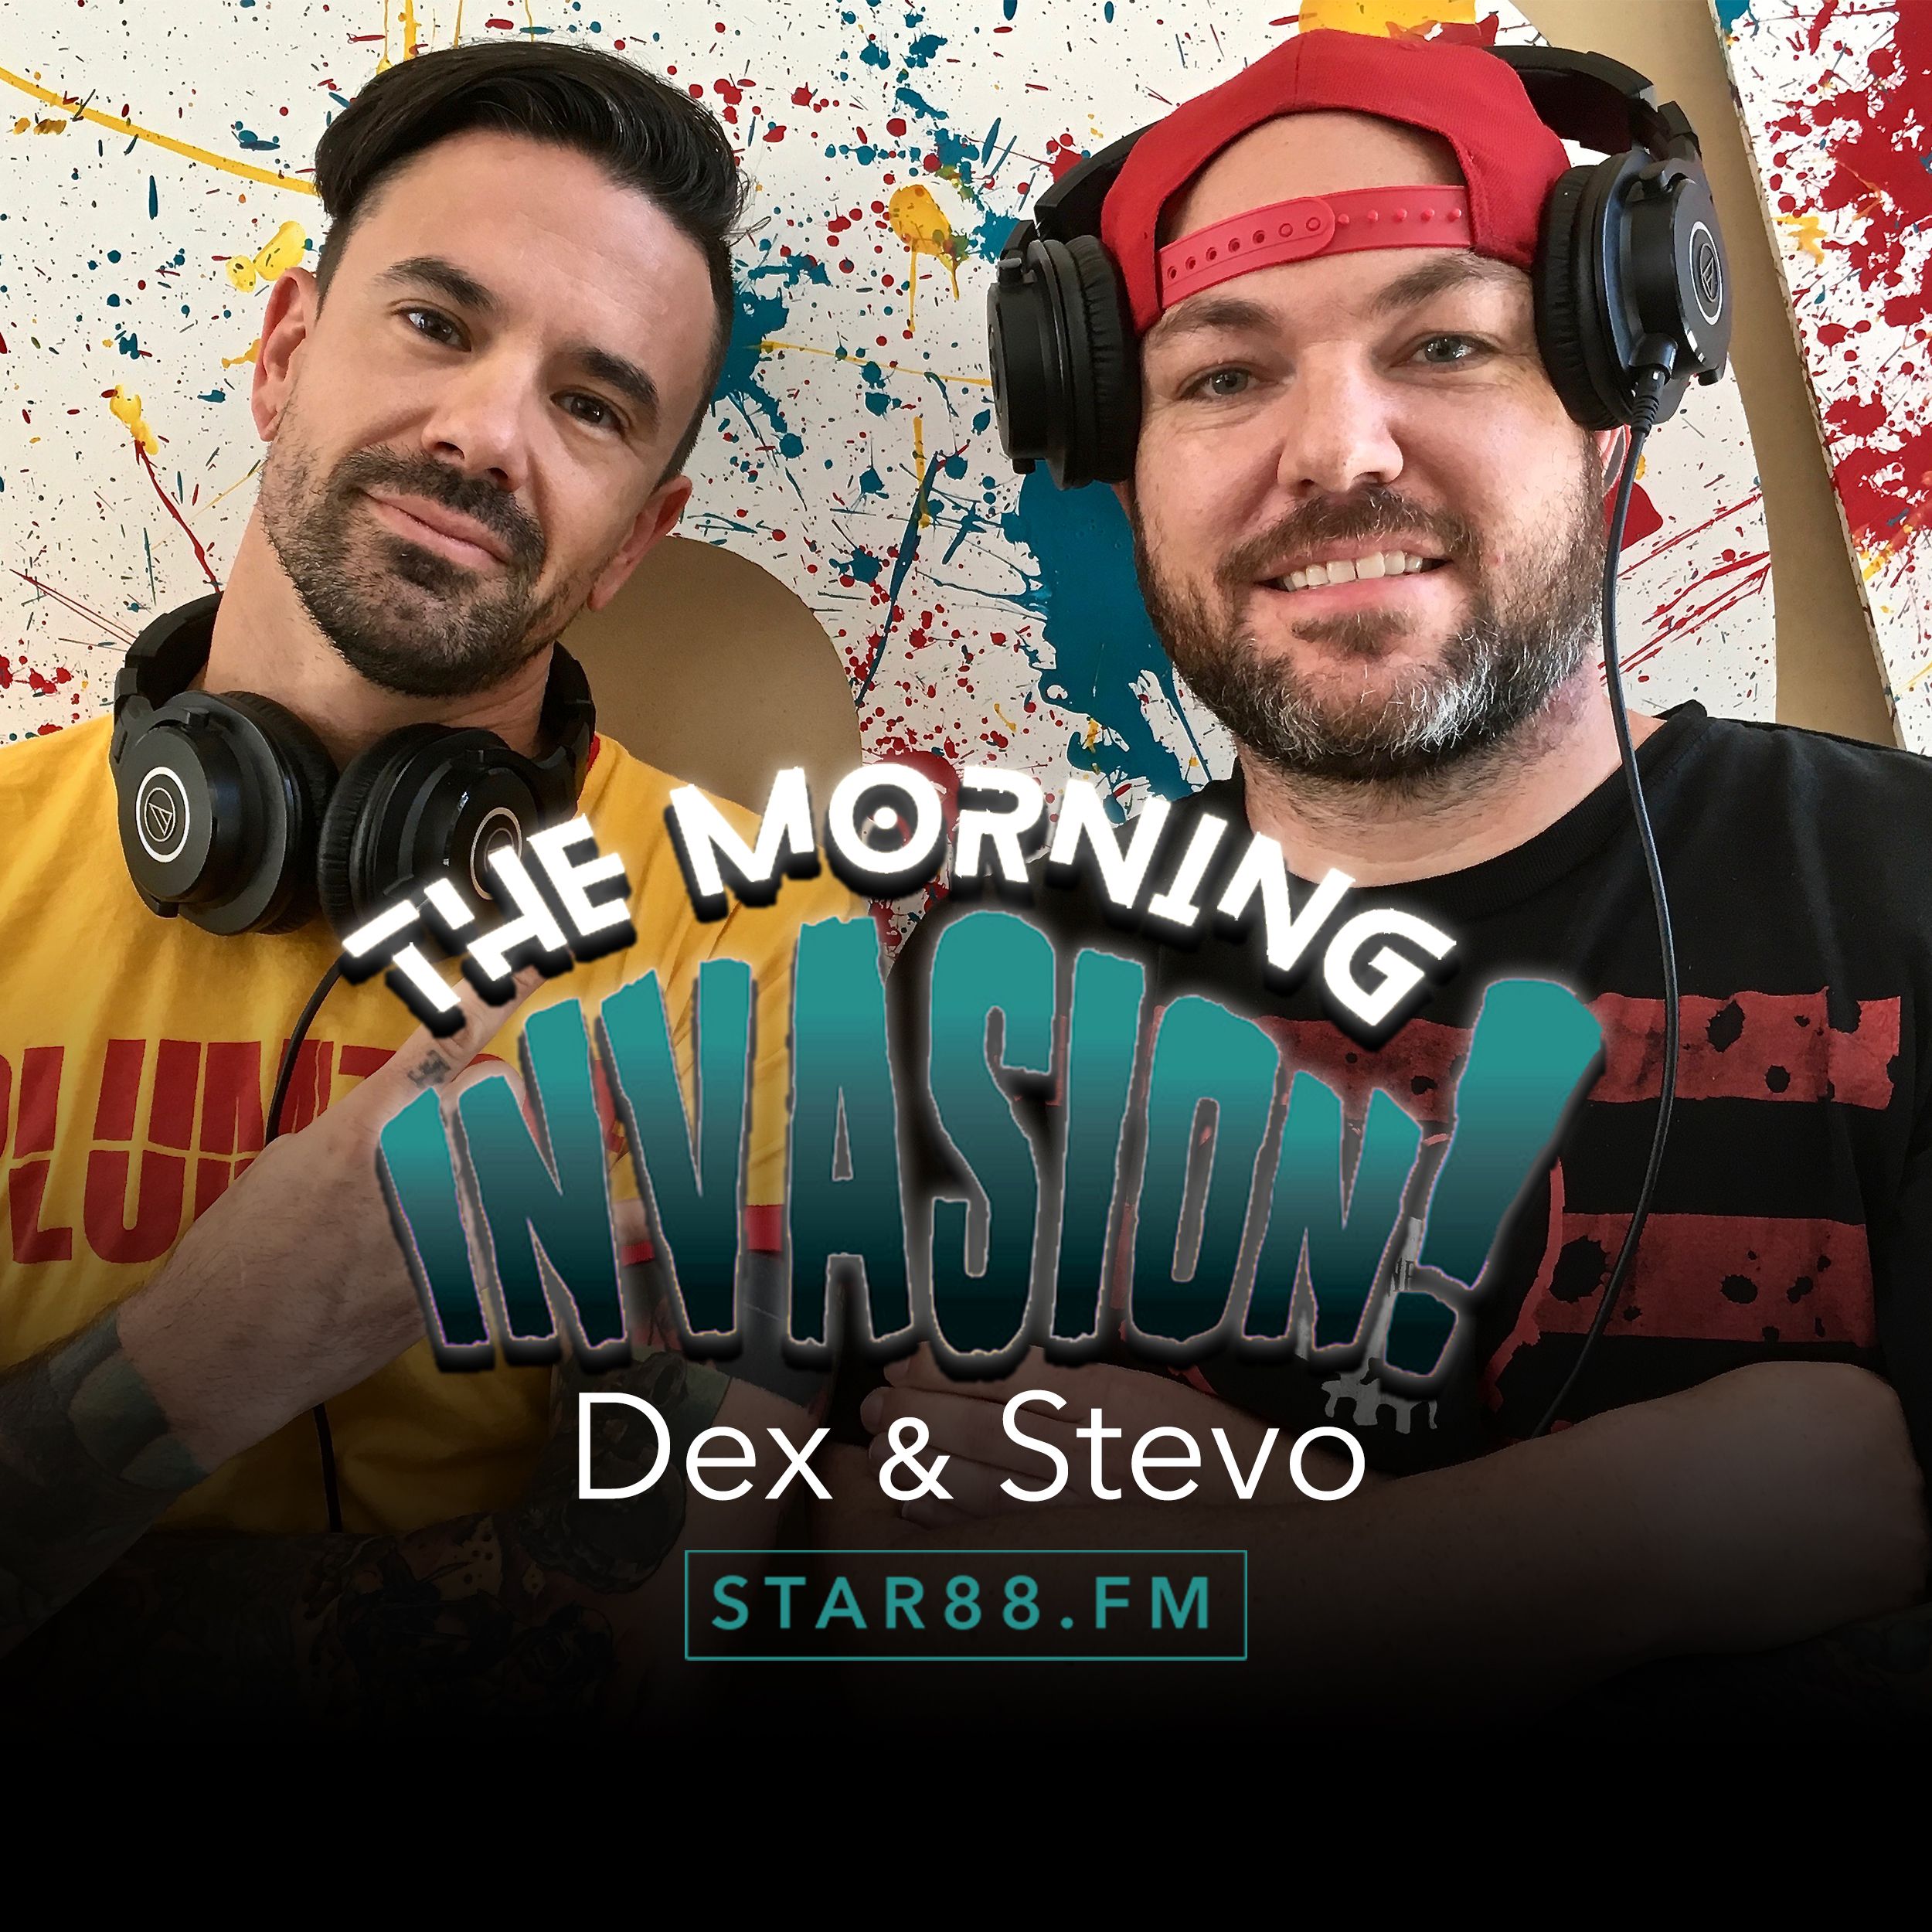 The Morning Invasion - March 11, 2019 - Hour 3 - Super Powers